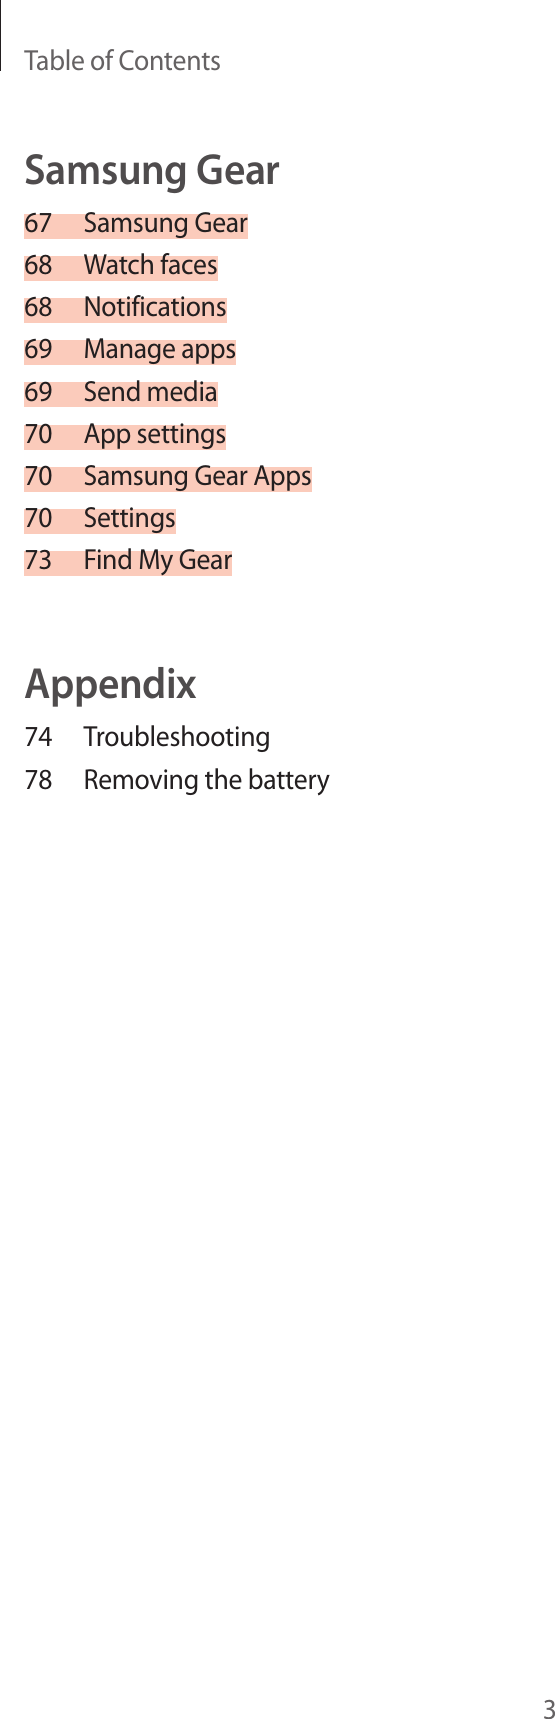 Table of Contents3Samsung Gear67  Samsung Gear68  Watch faces68 Notifications69  Manage apps69  Send media70  App settings70  Samsung Gear Apps70 Settings73  Find My GearAppendix74 Troubleshooting78  Removing the battery